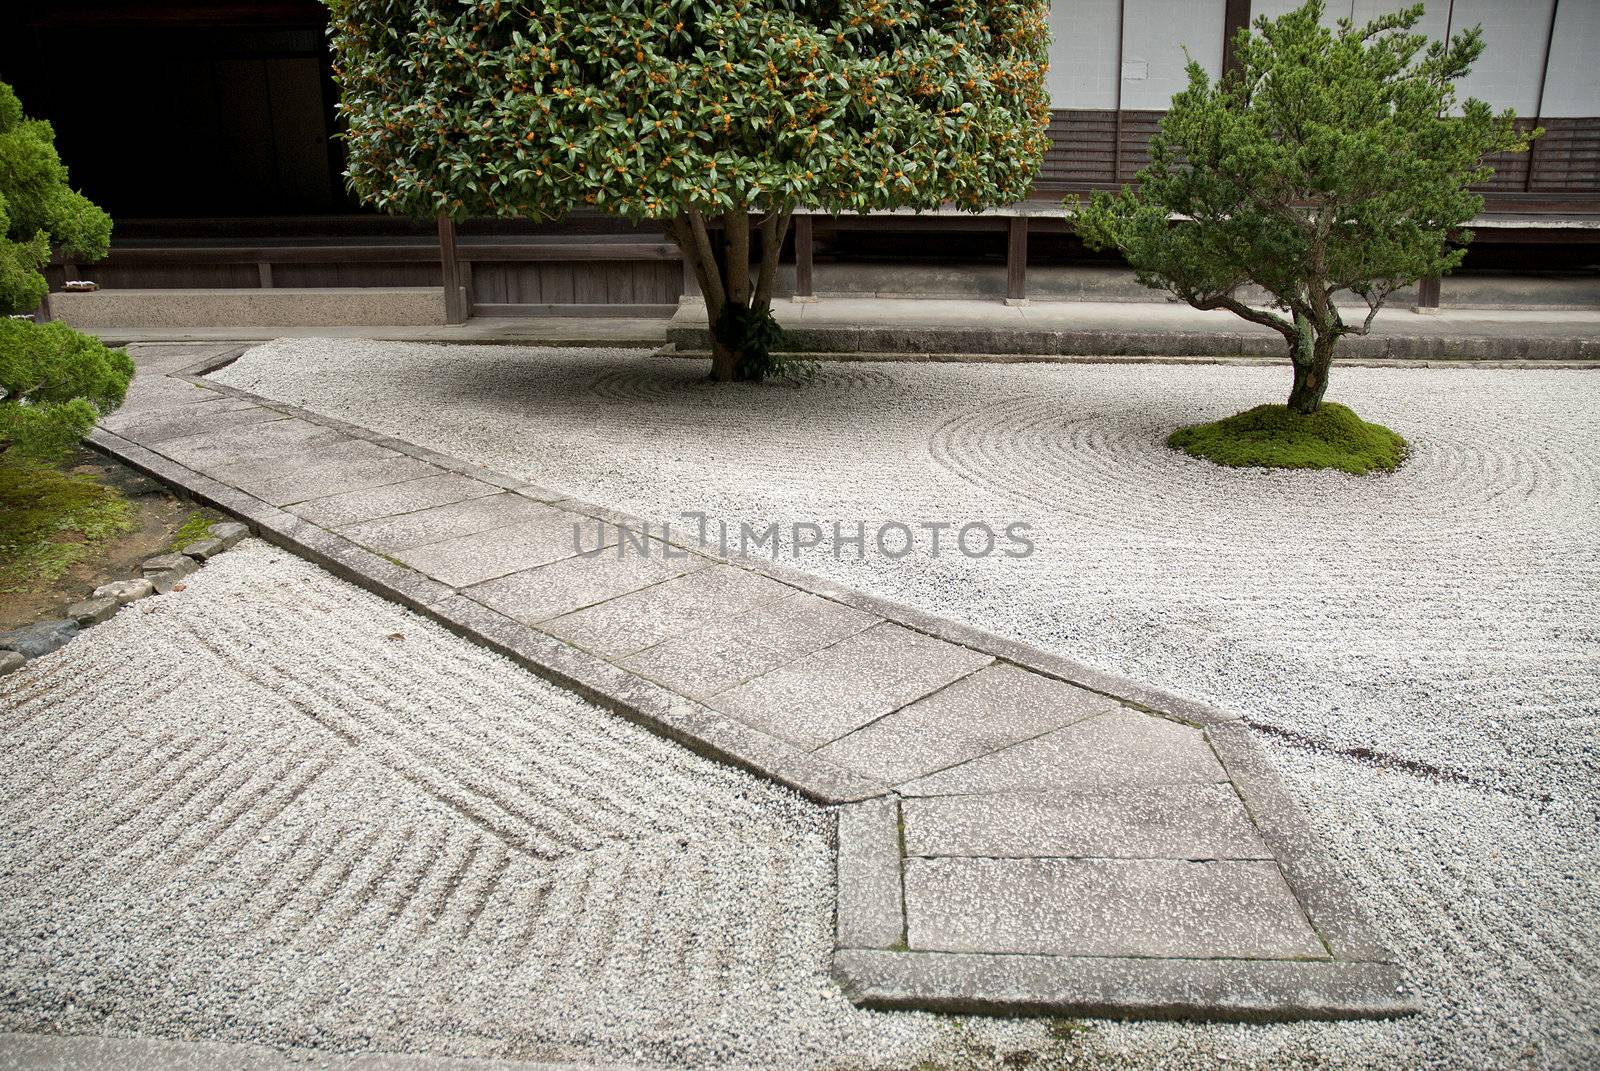 japanese traditional stone garden in kyoto japan by jackmalipan